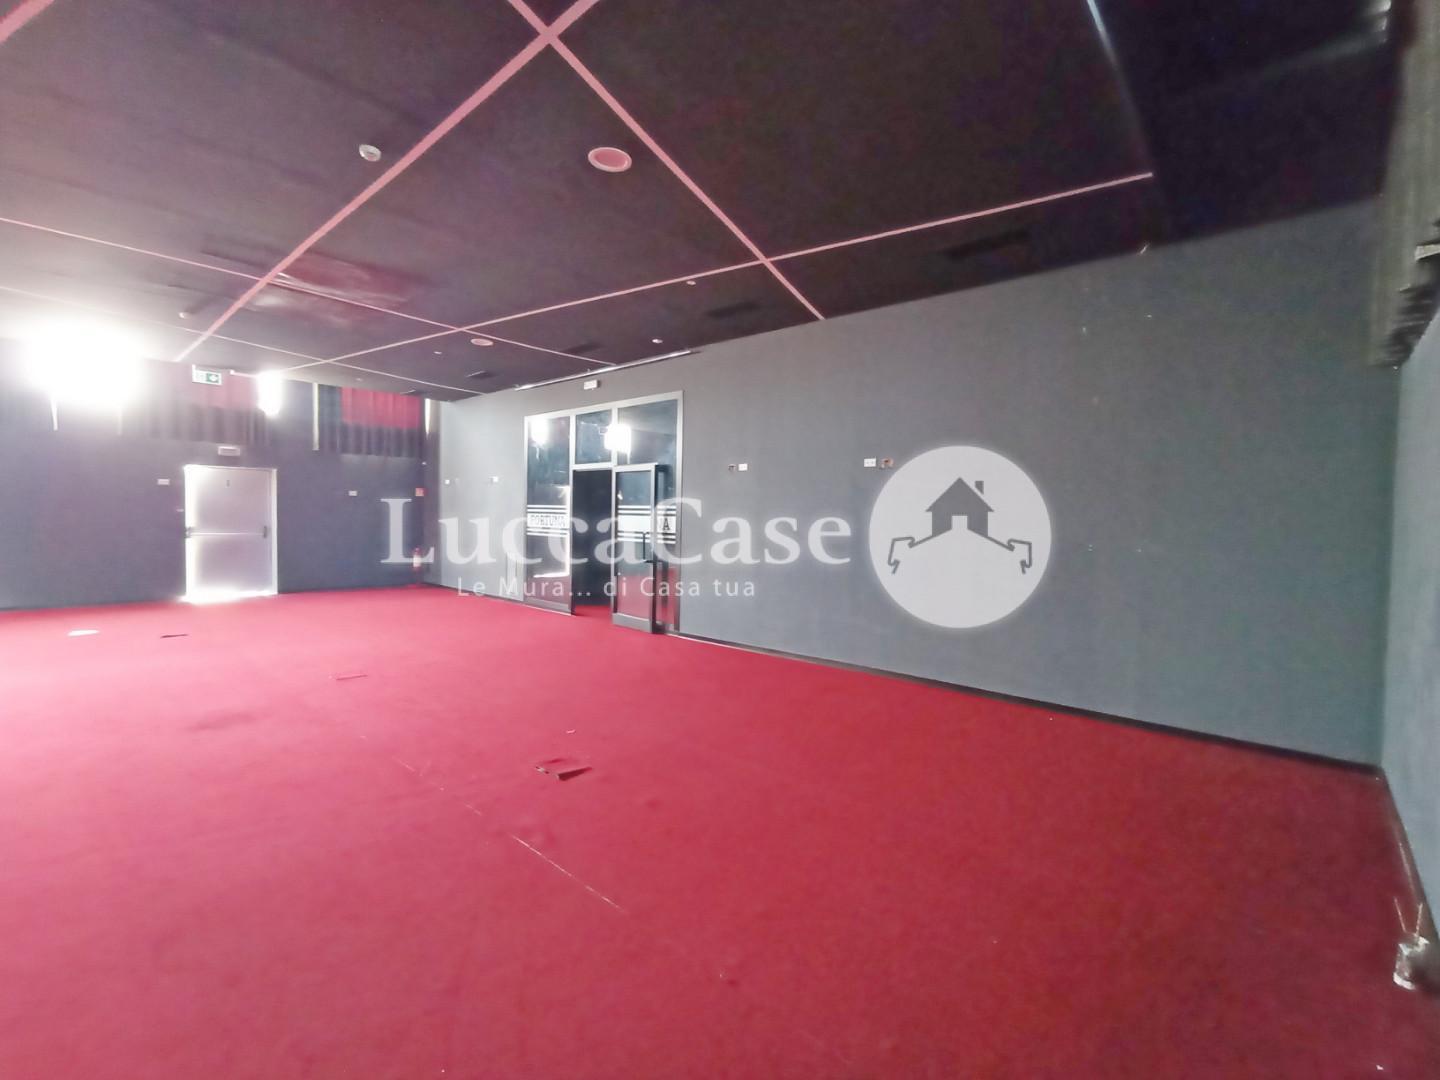 Commercial depot for sale in Porcari (LU)